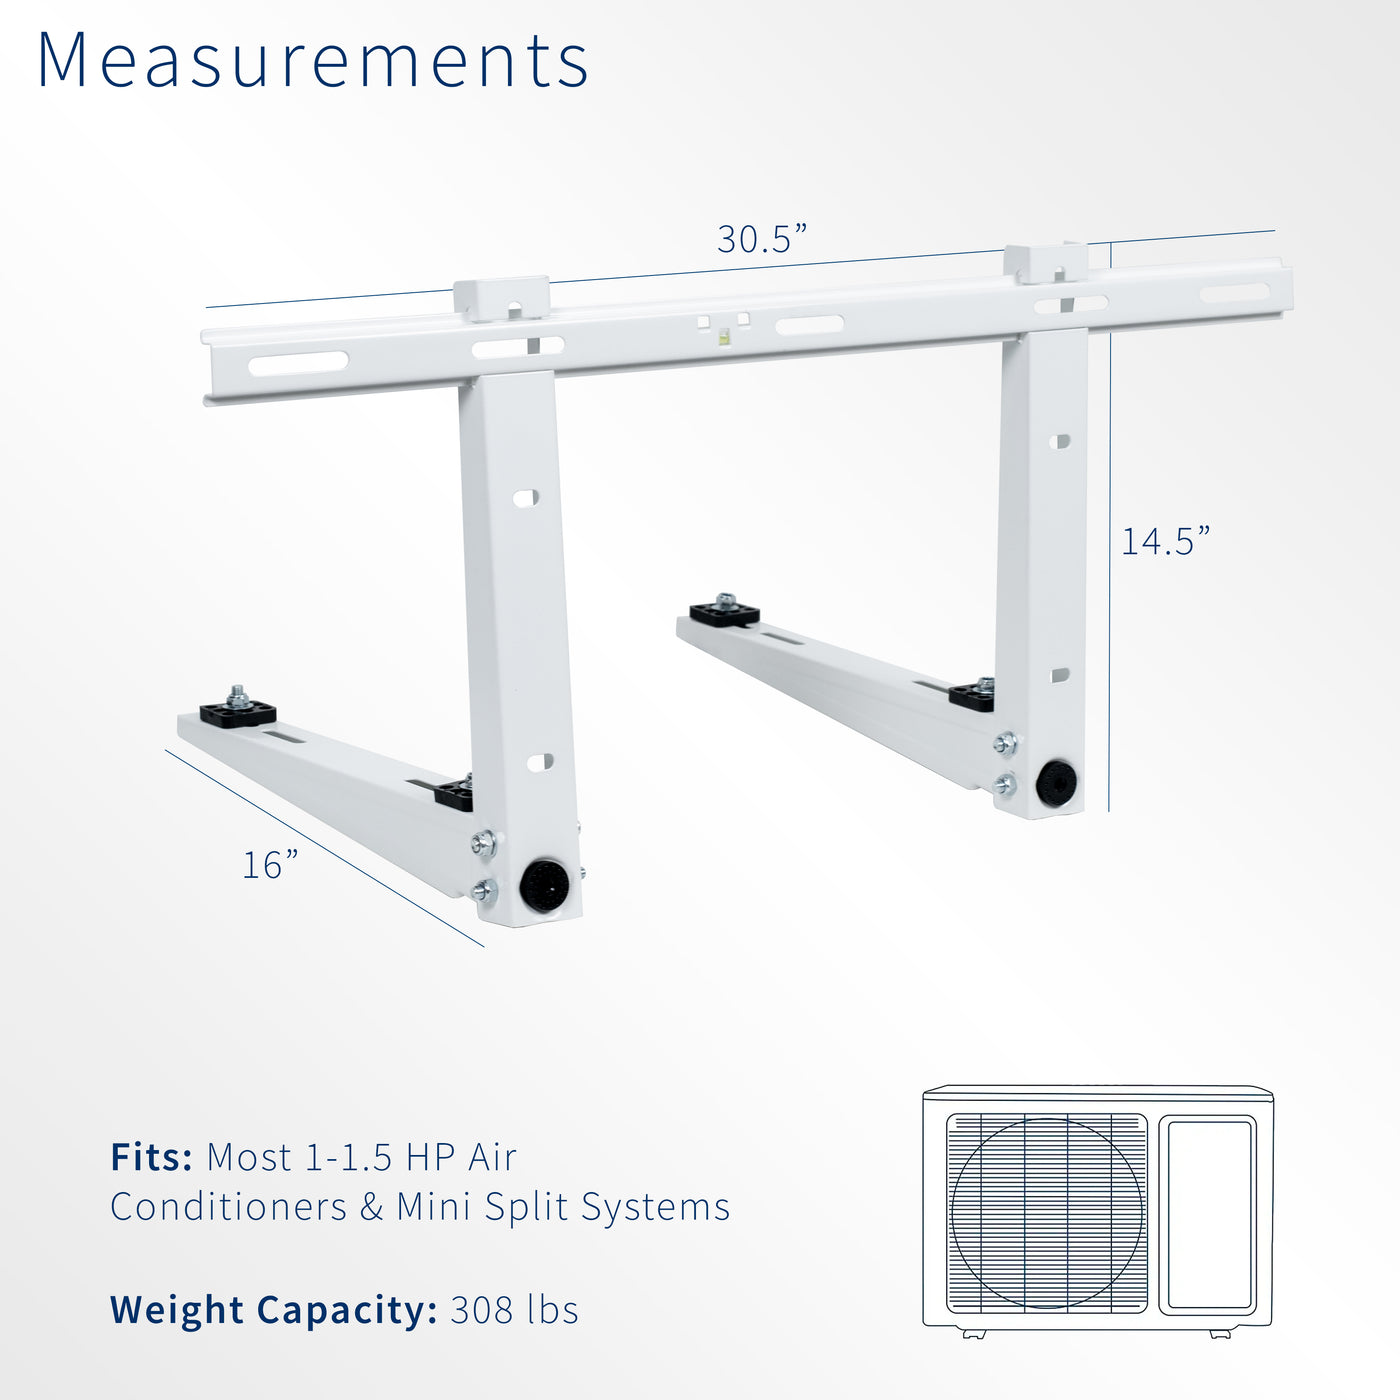 Mini split air conditioner wall mount with adjustable width and anti-vibration padding.